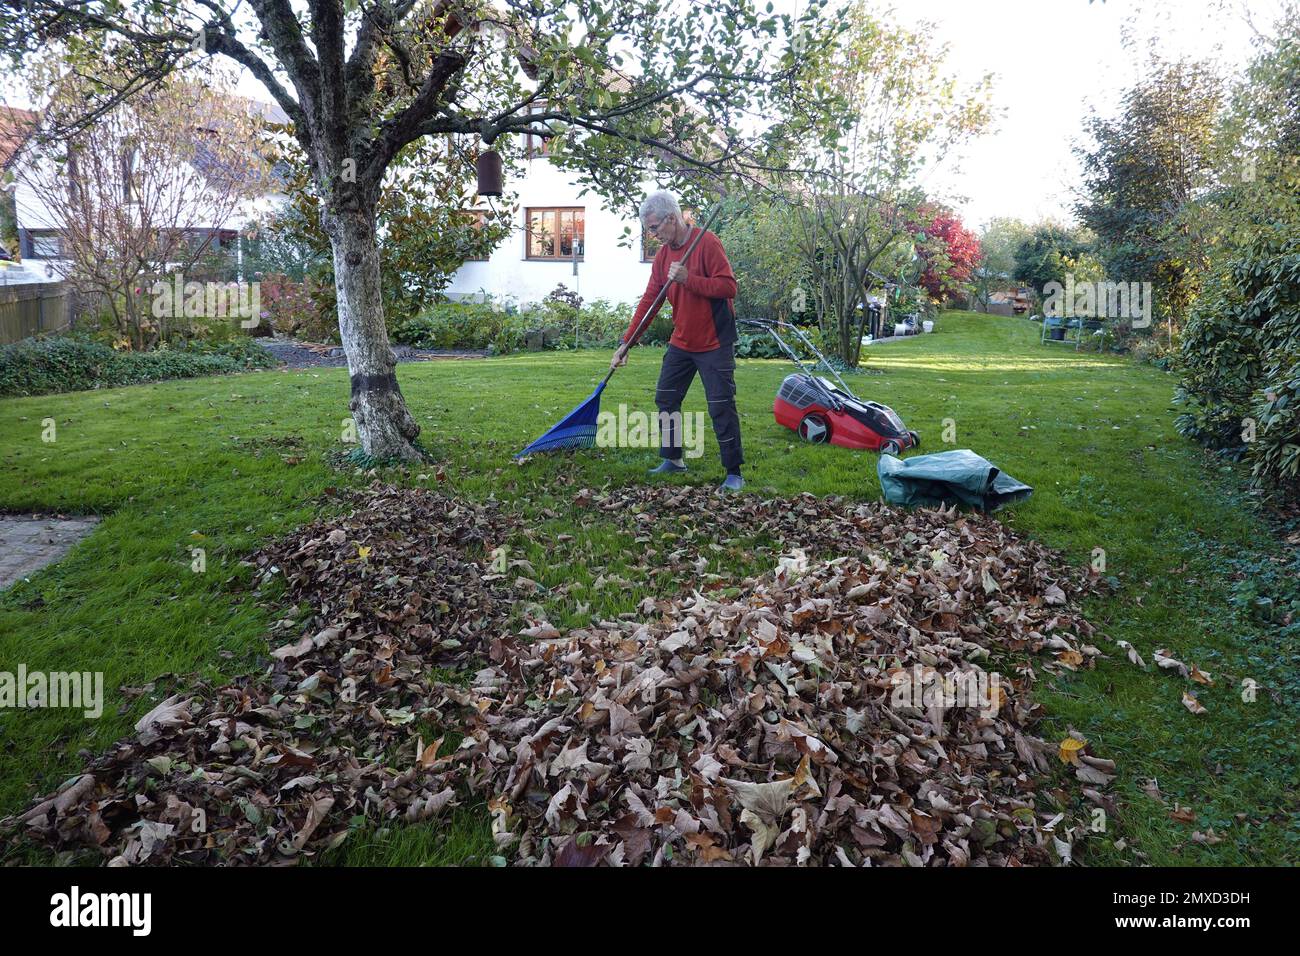 man raking leaves before the last lawn cut in the garden, Germany Stock Photo